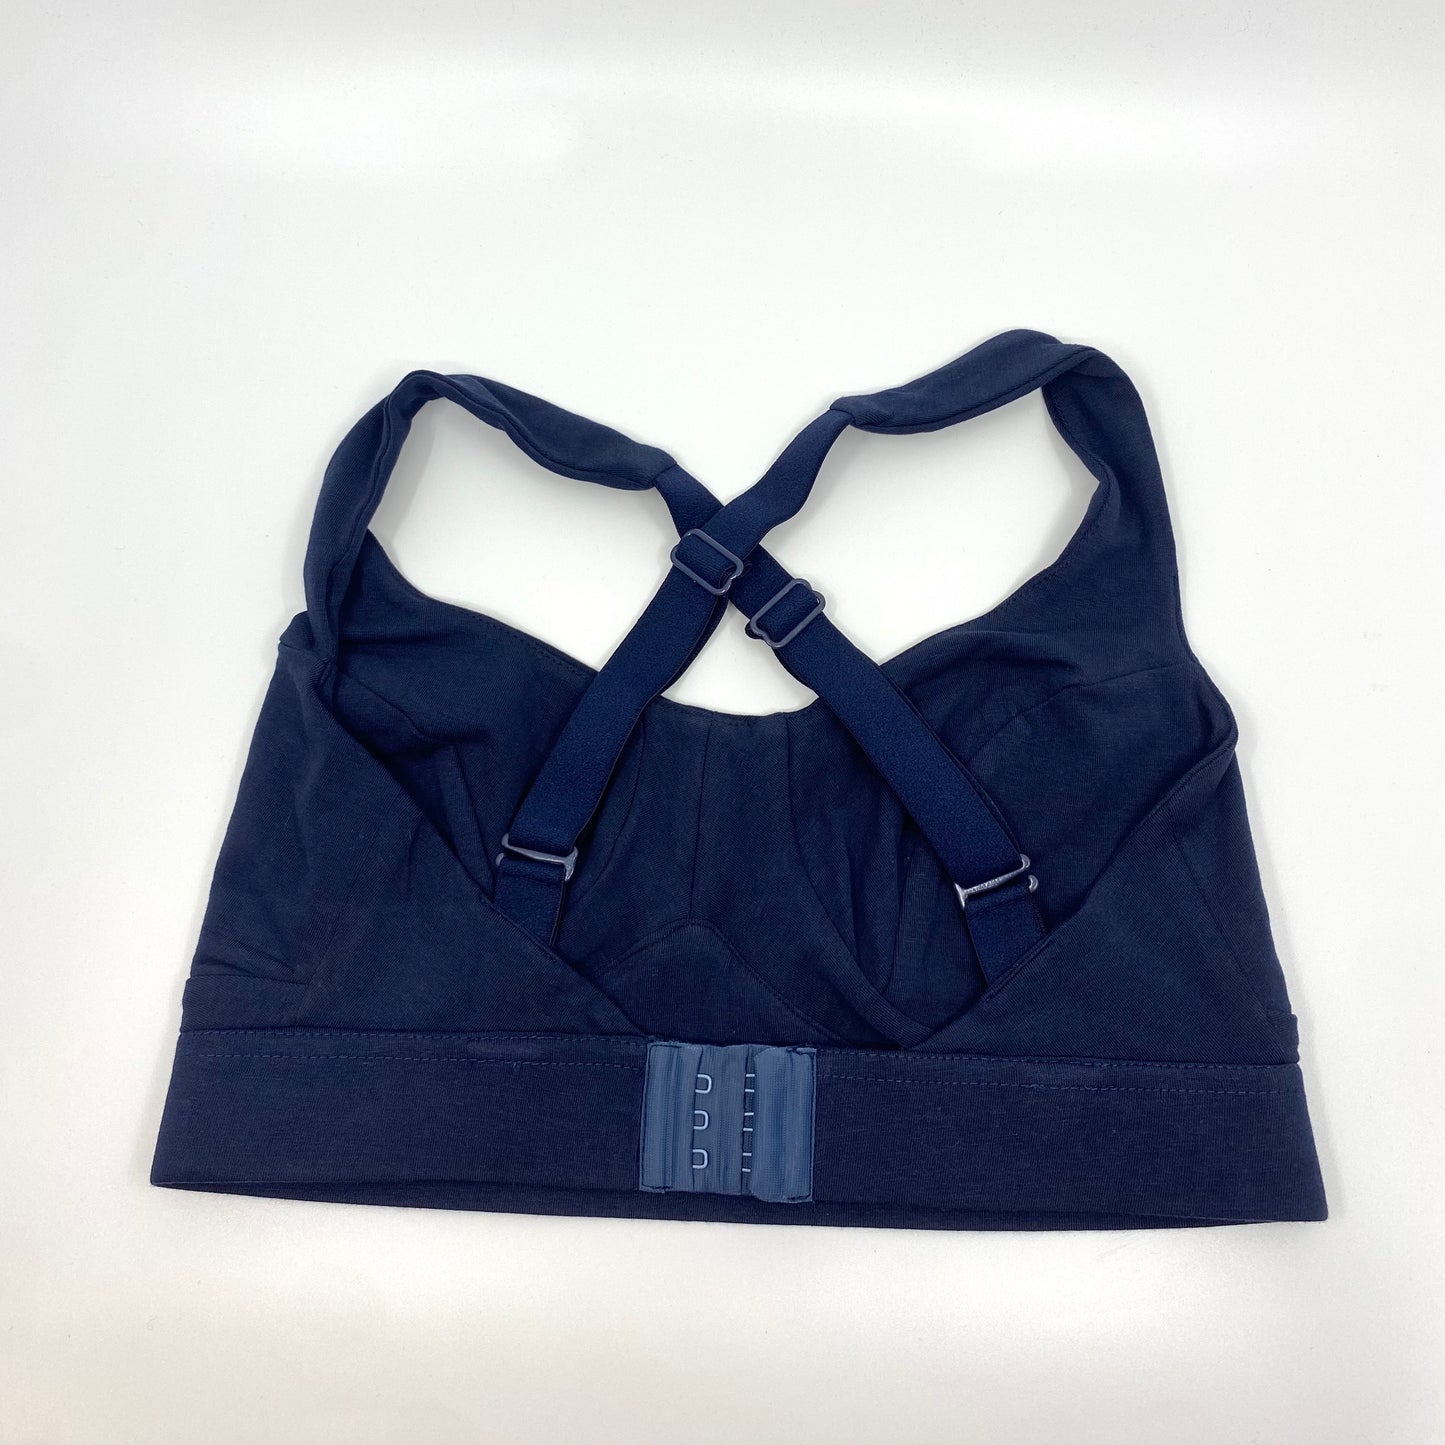 Women's organic cotton bra in navy blue - more supportive style